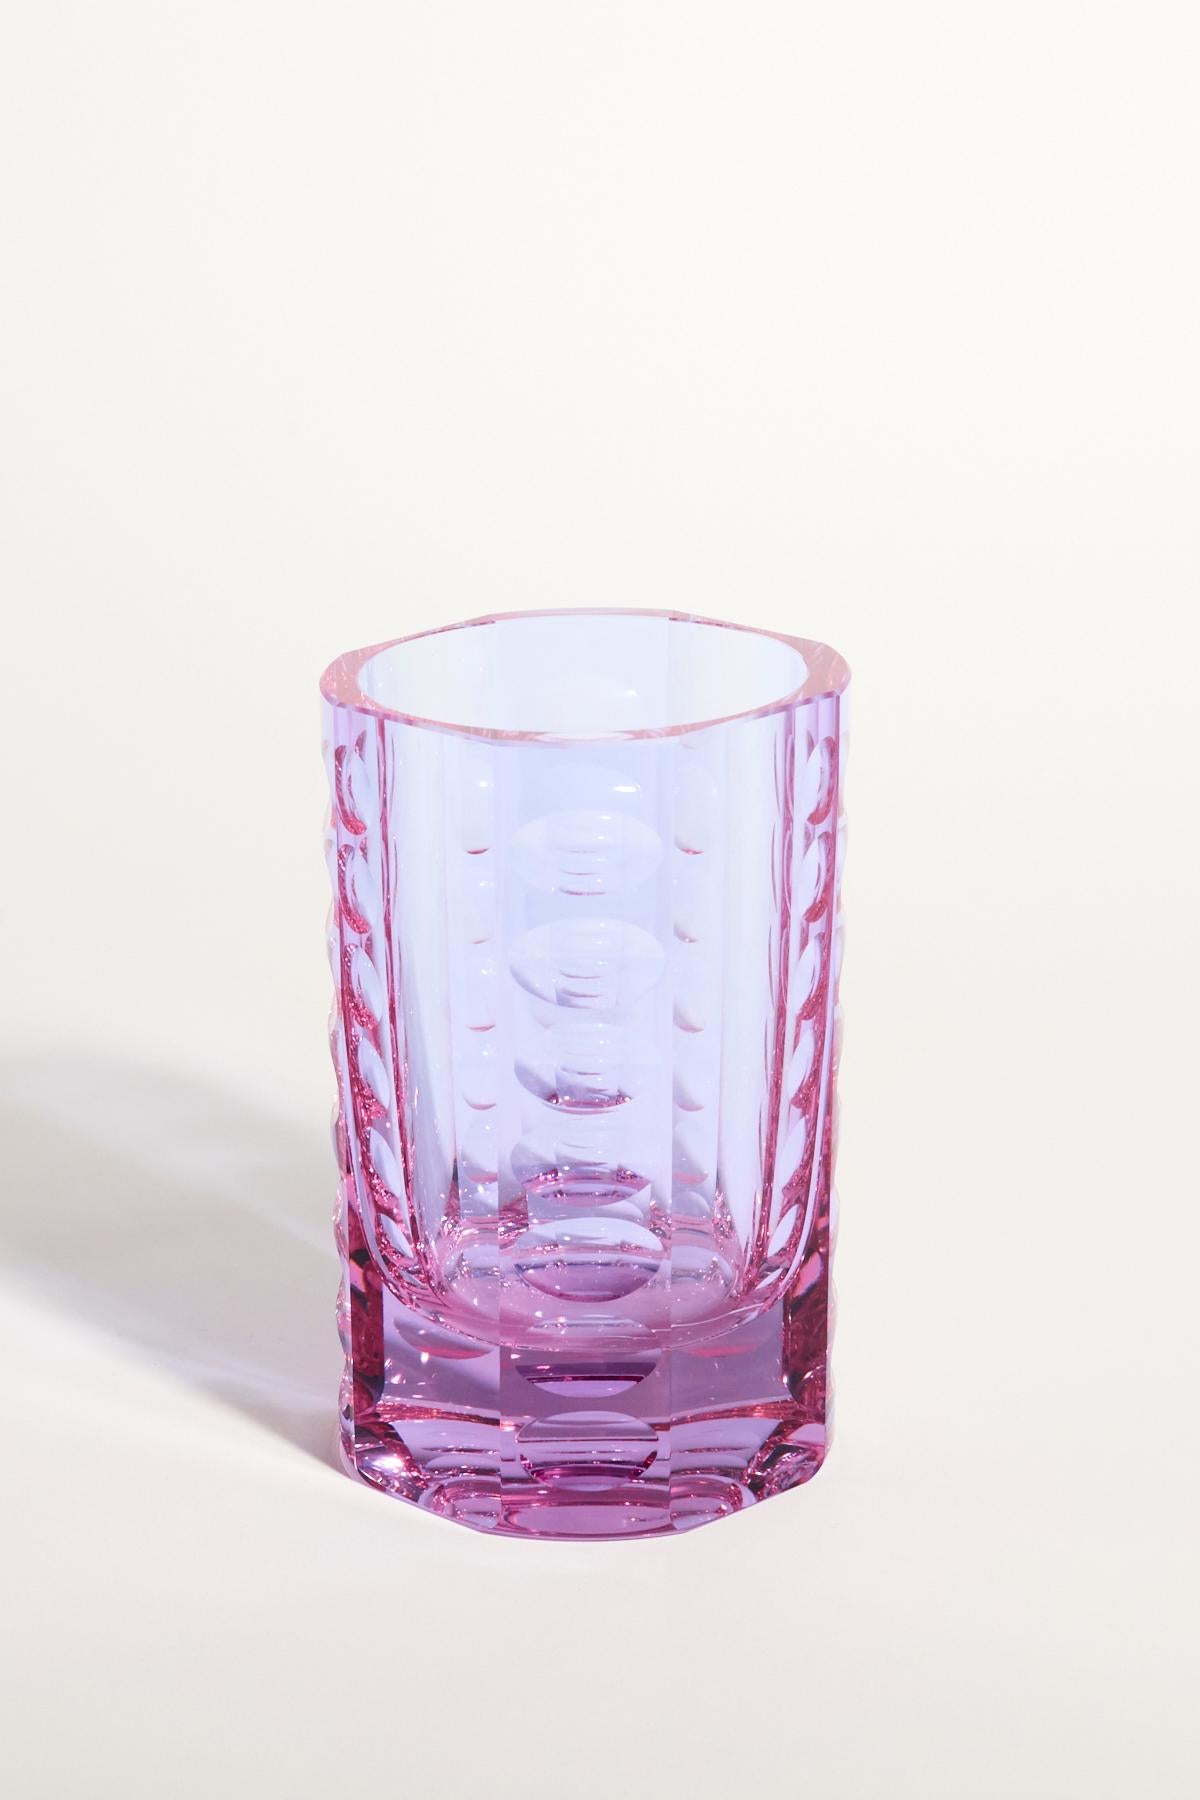 Beautiful Moser glass vase in a soft violet color